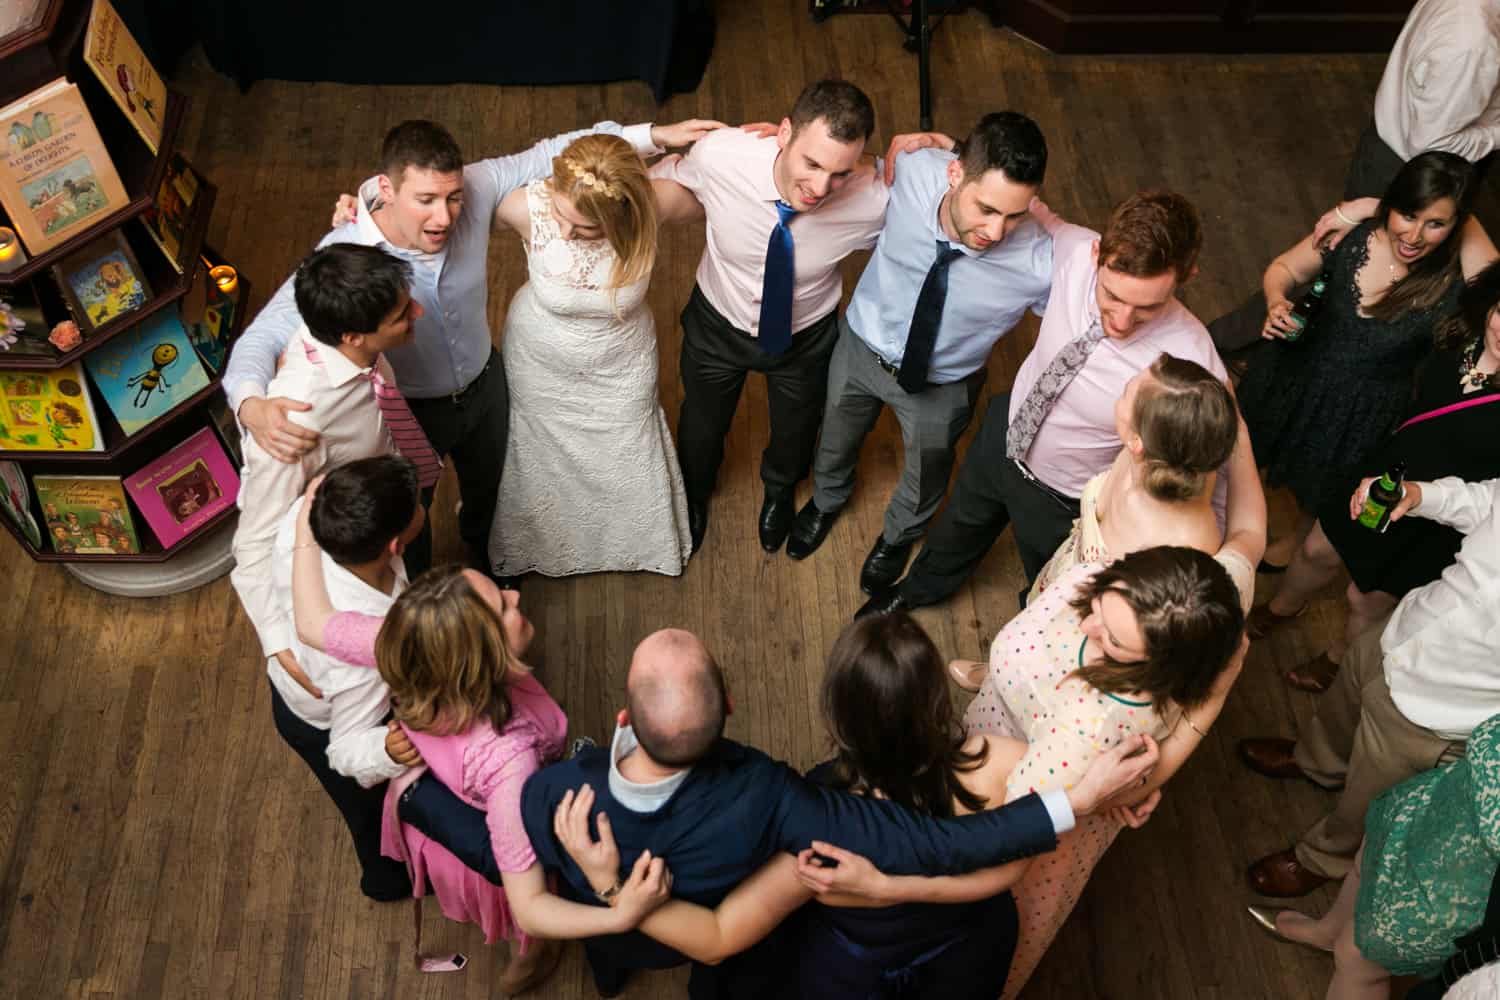 Guests hugging in circle at a Housing Works wedding